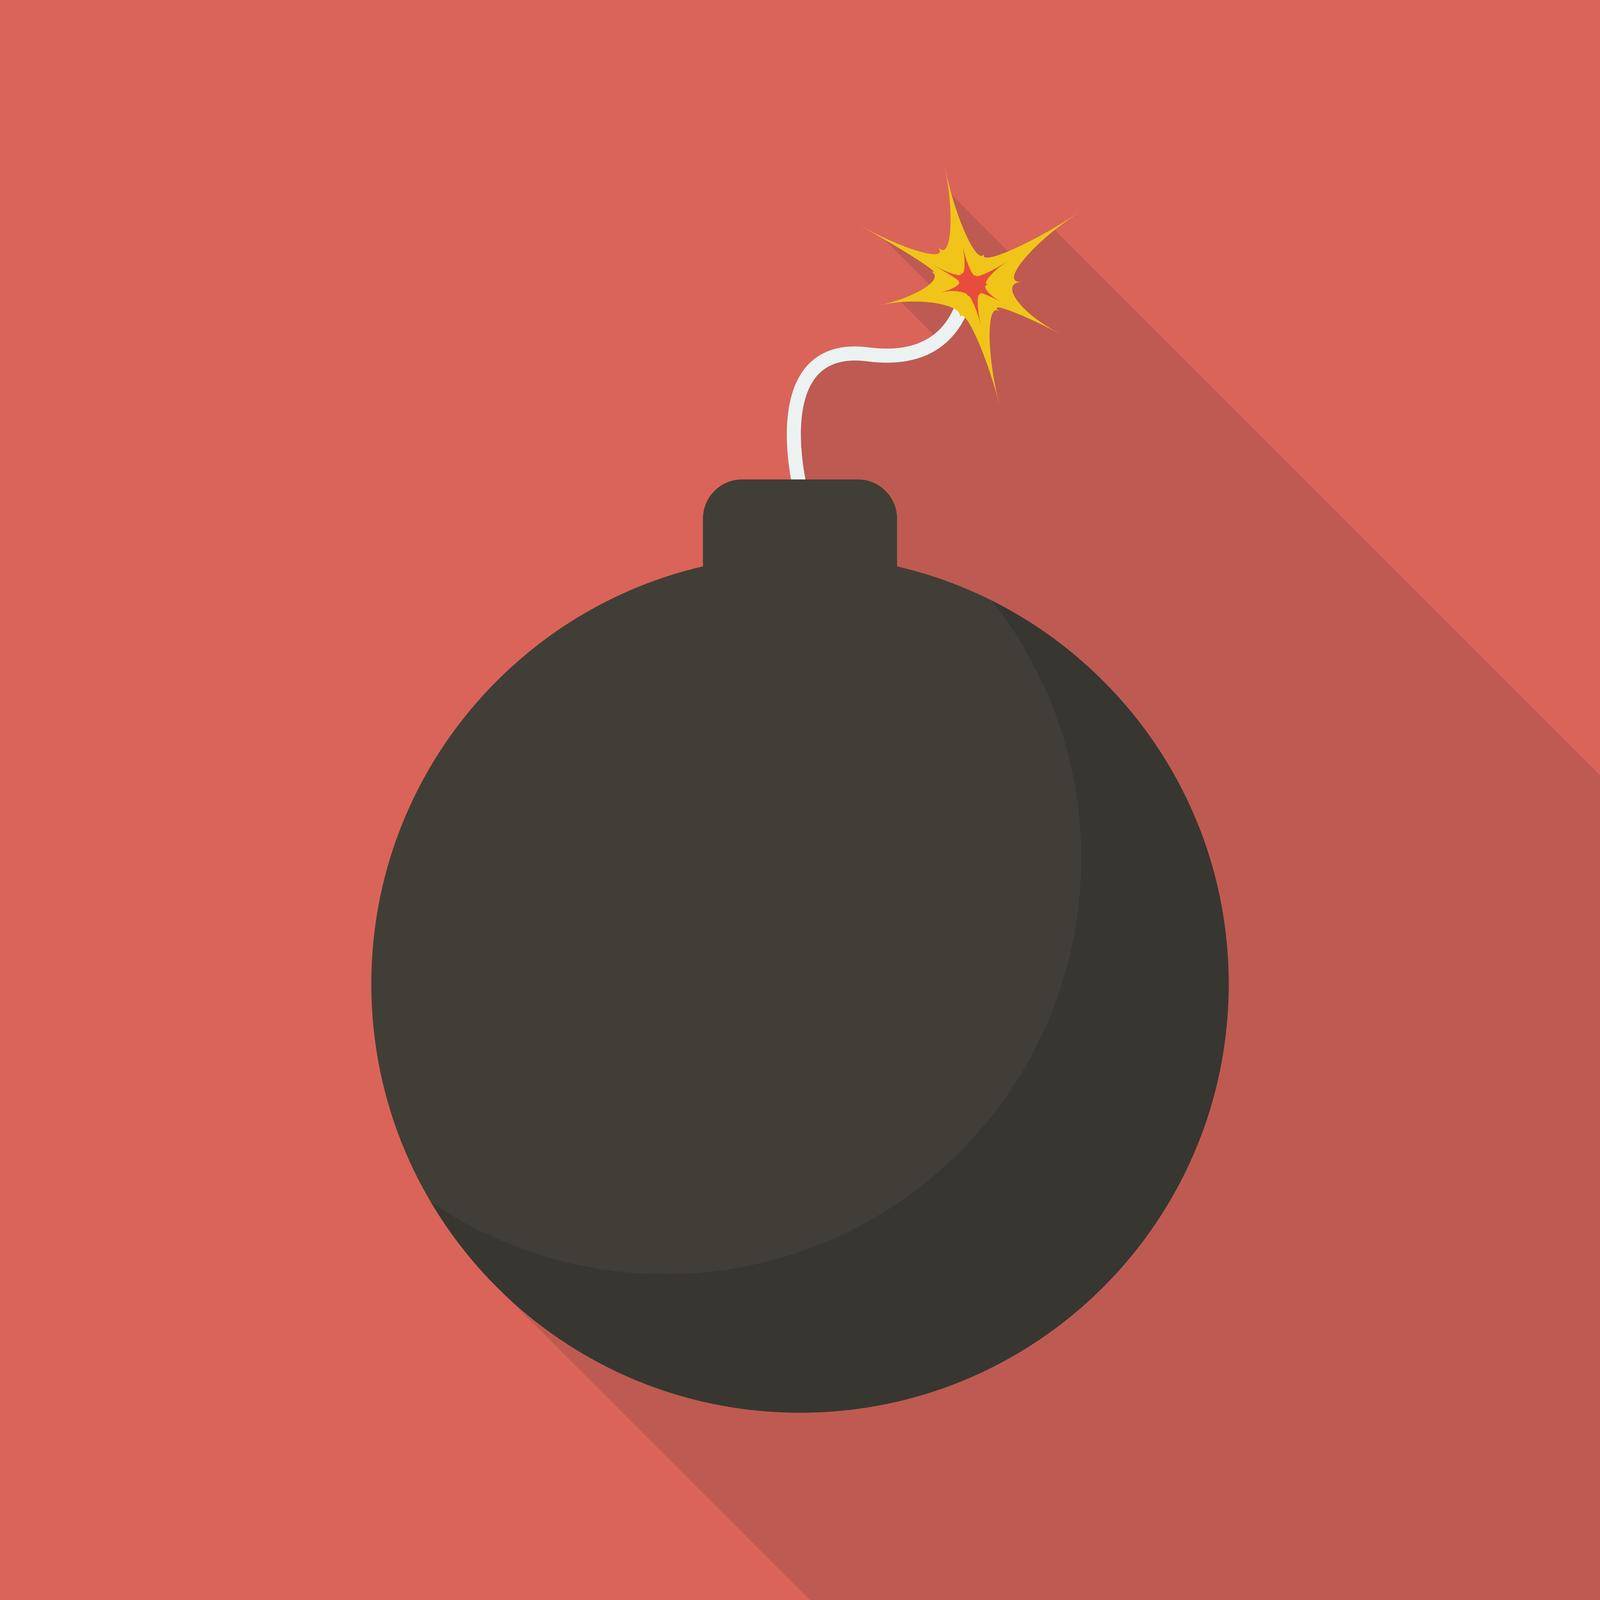 Bomb with sparkle. Flat design style